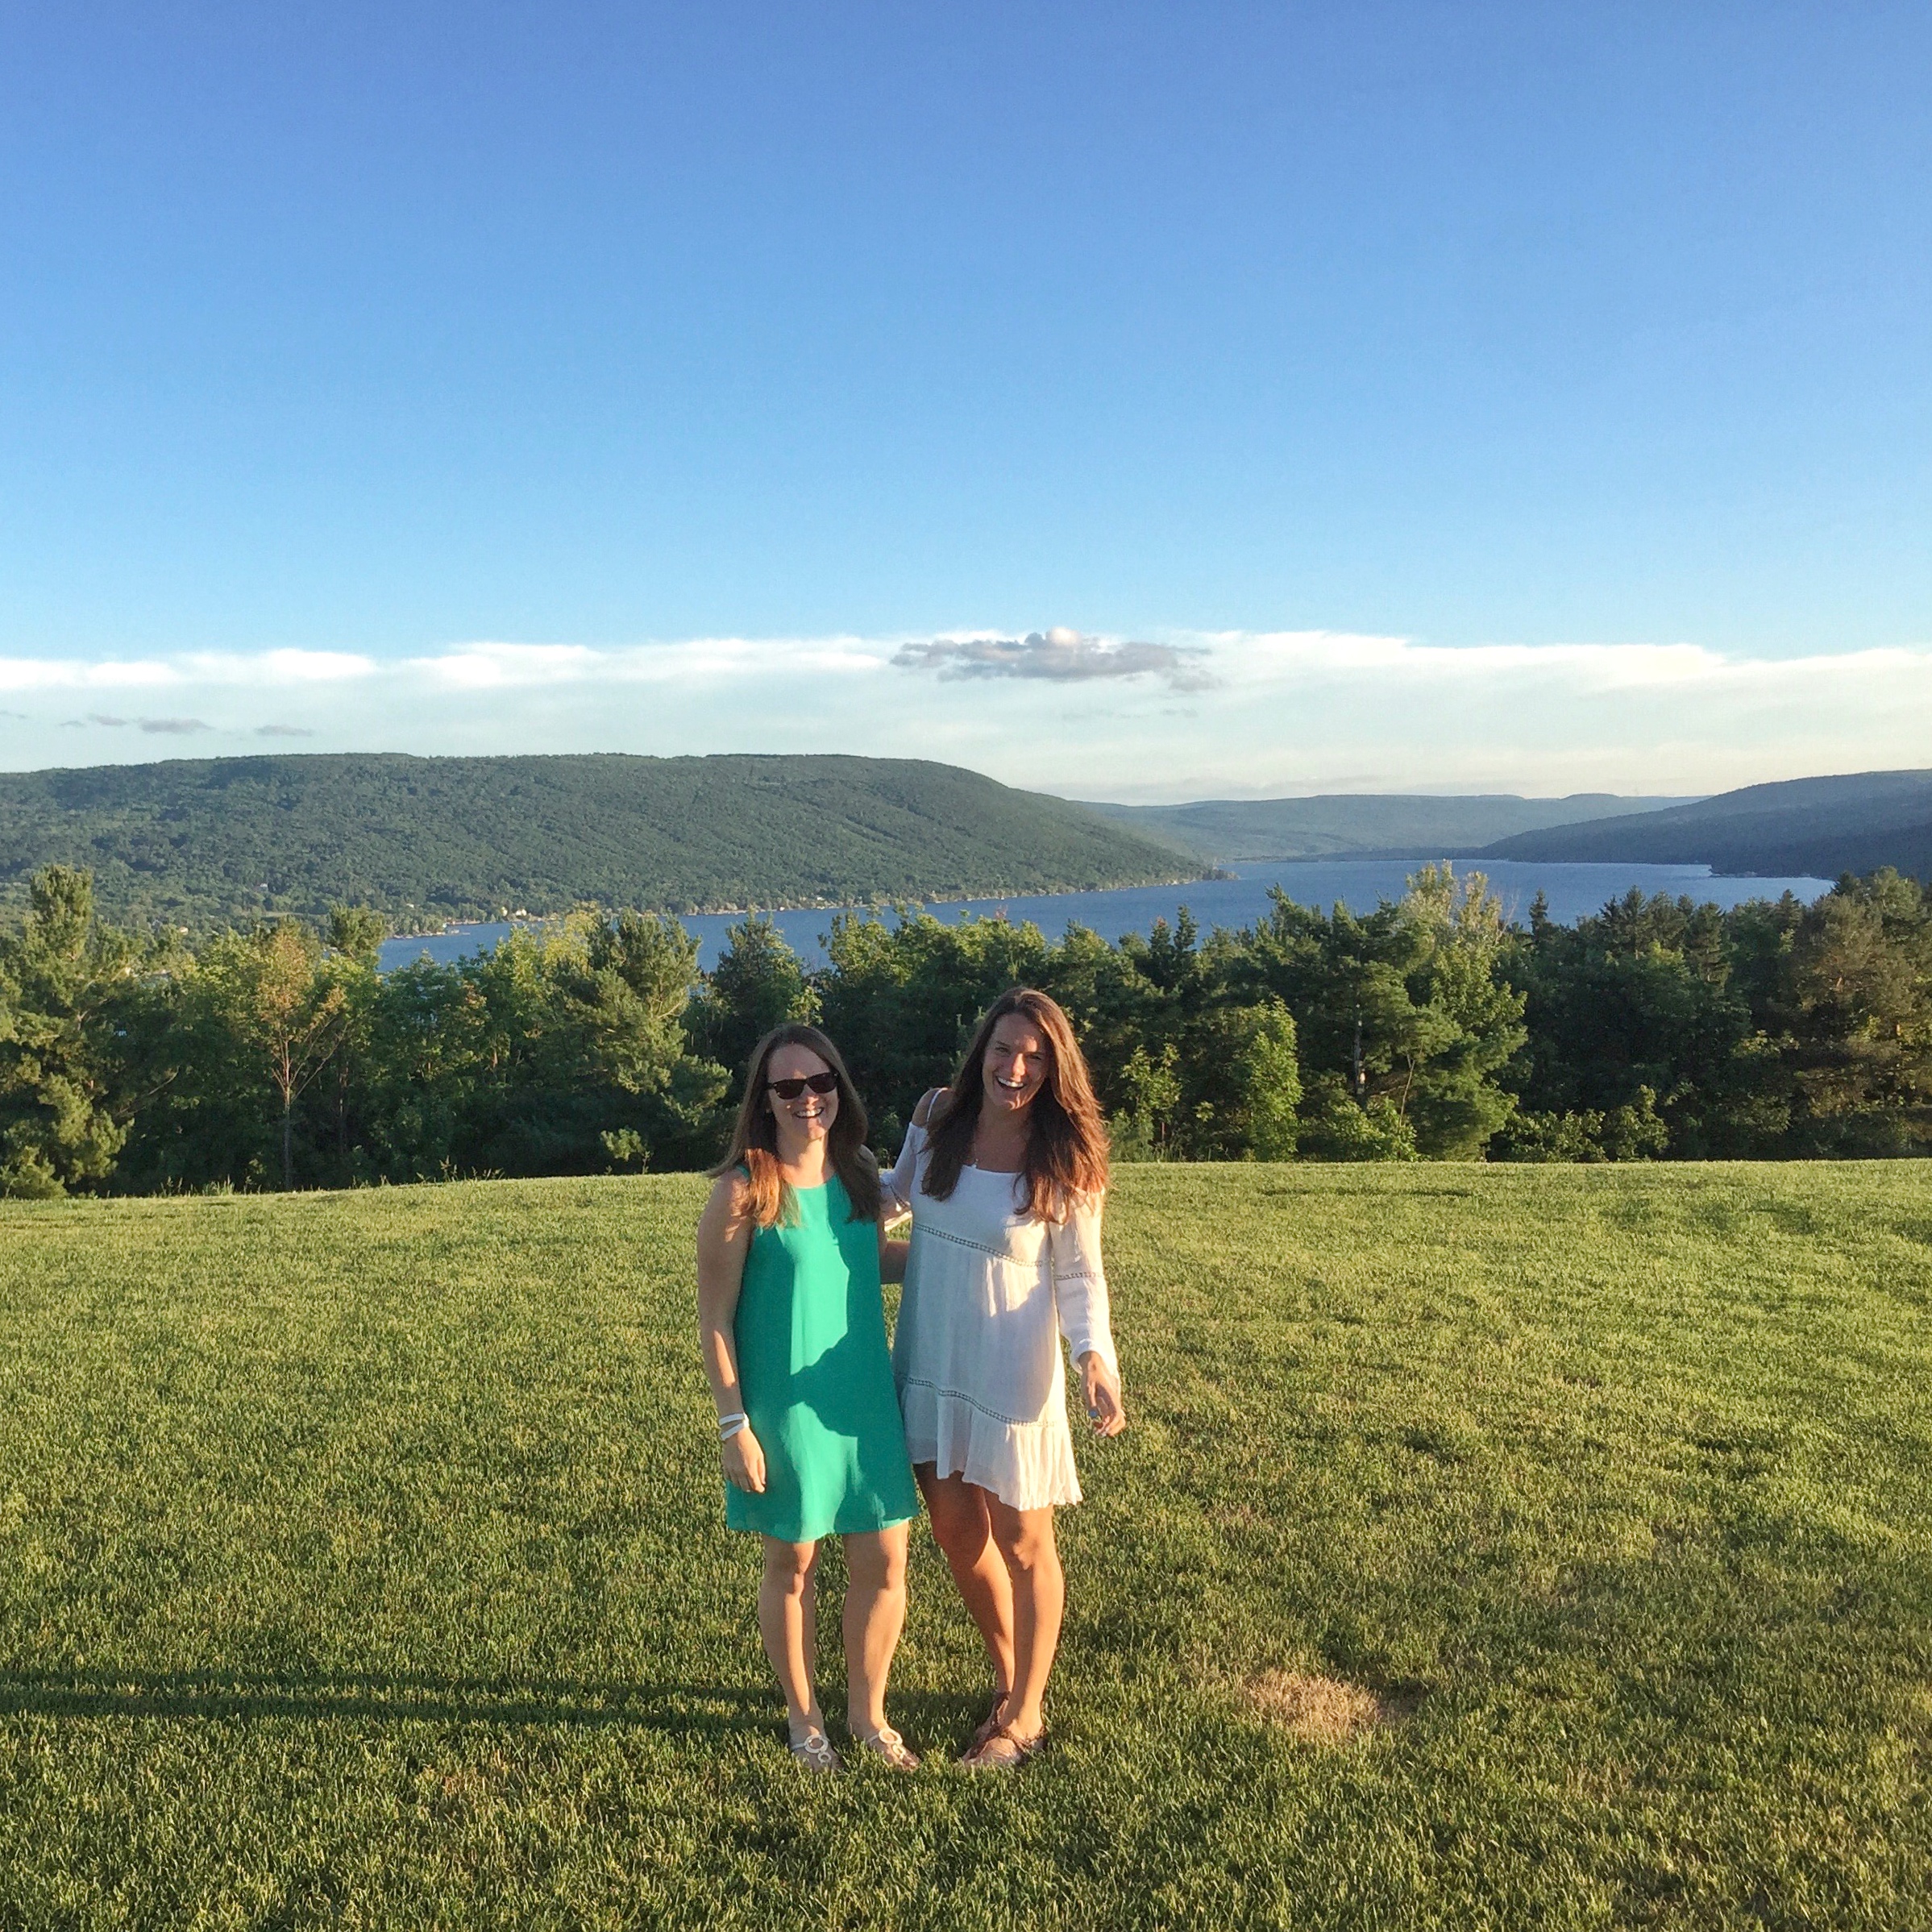 Explore the wineries and lakes of New York's Finger Lakes region, an easy weekend trip from New York City.